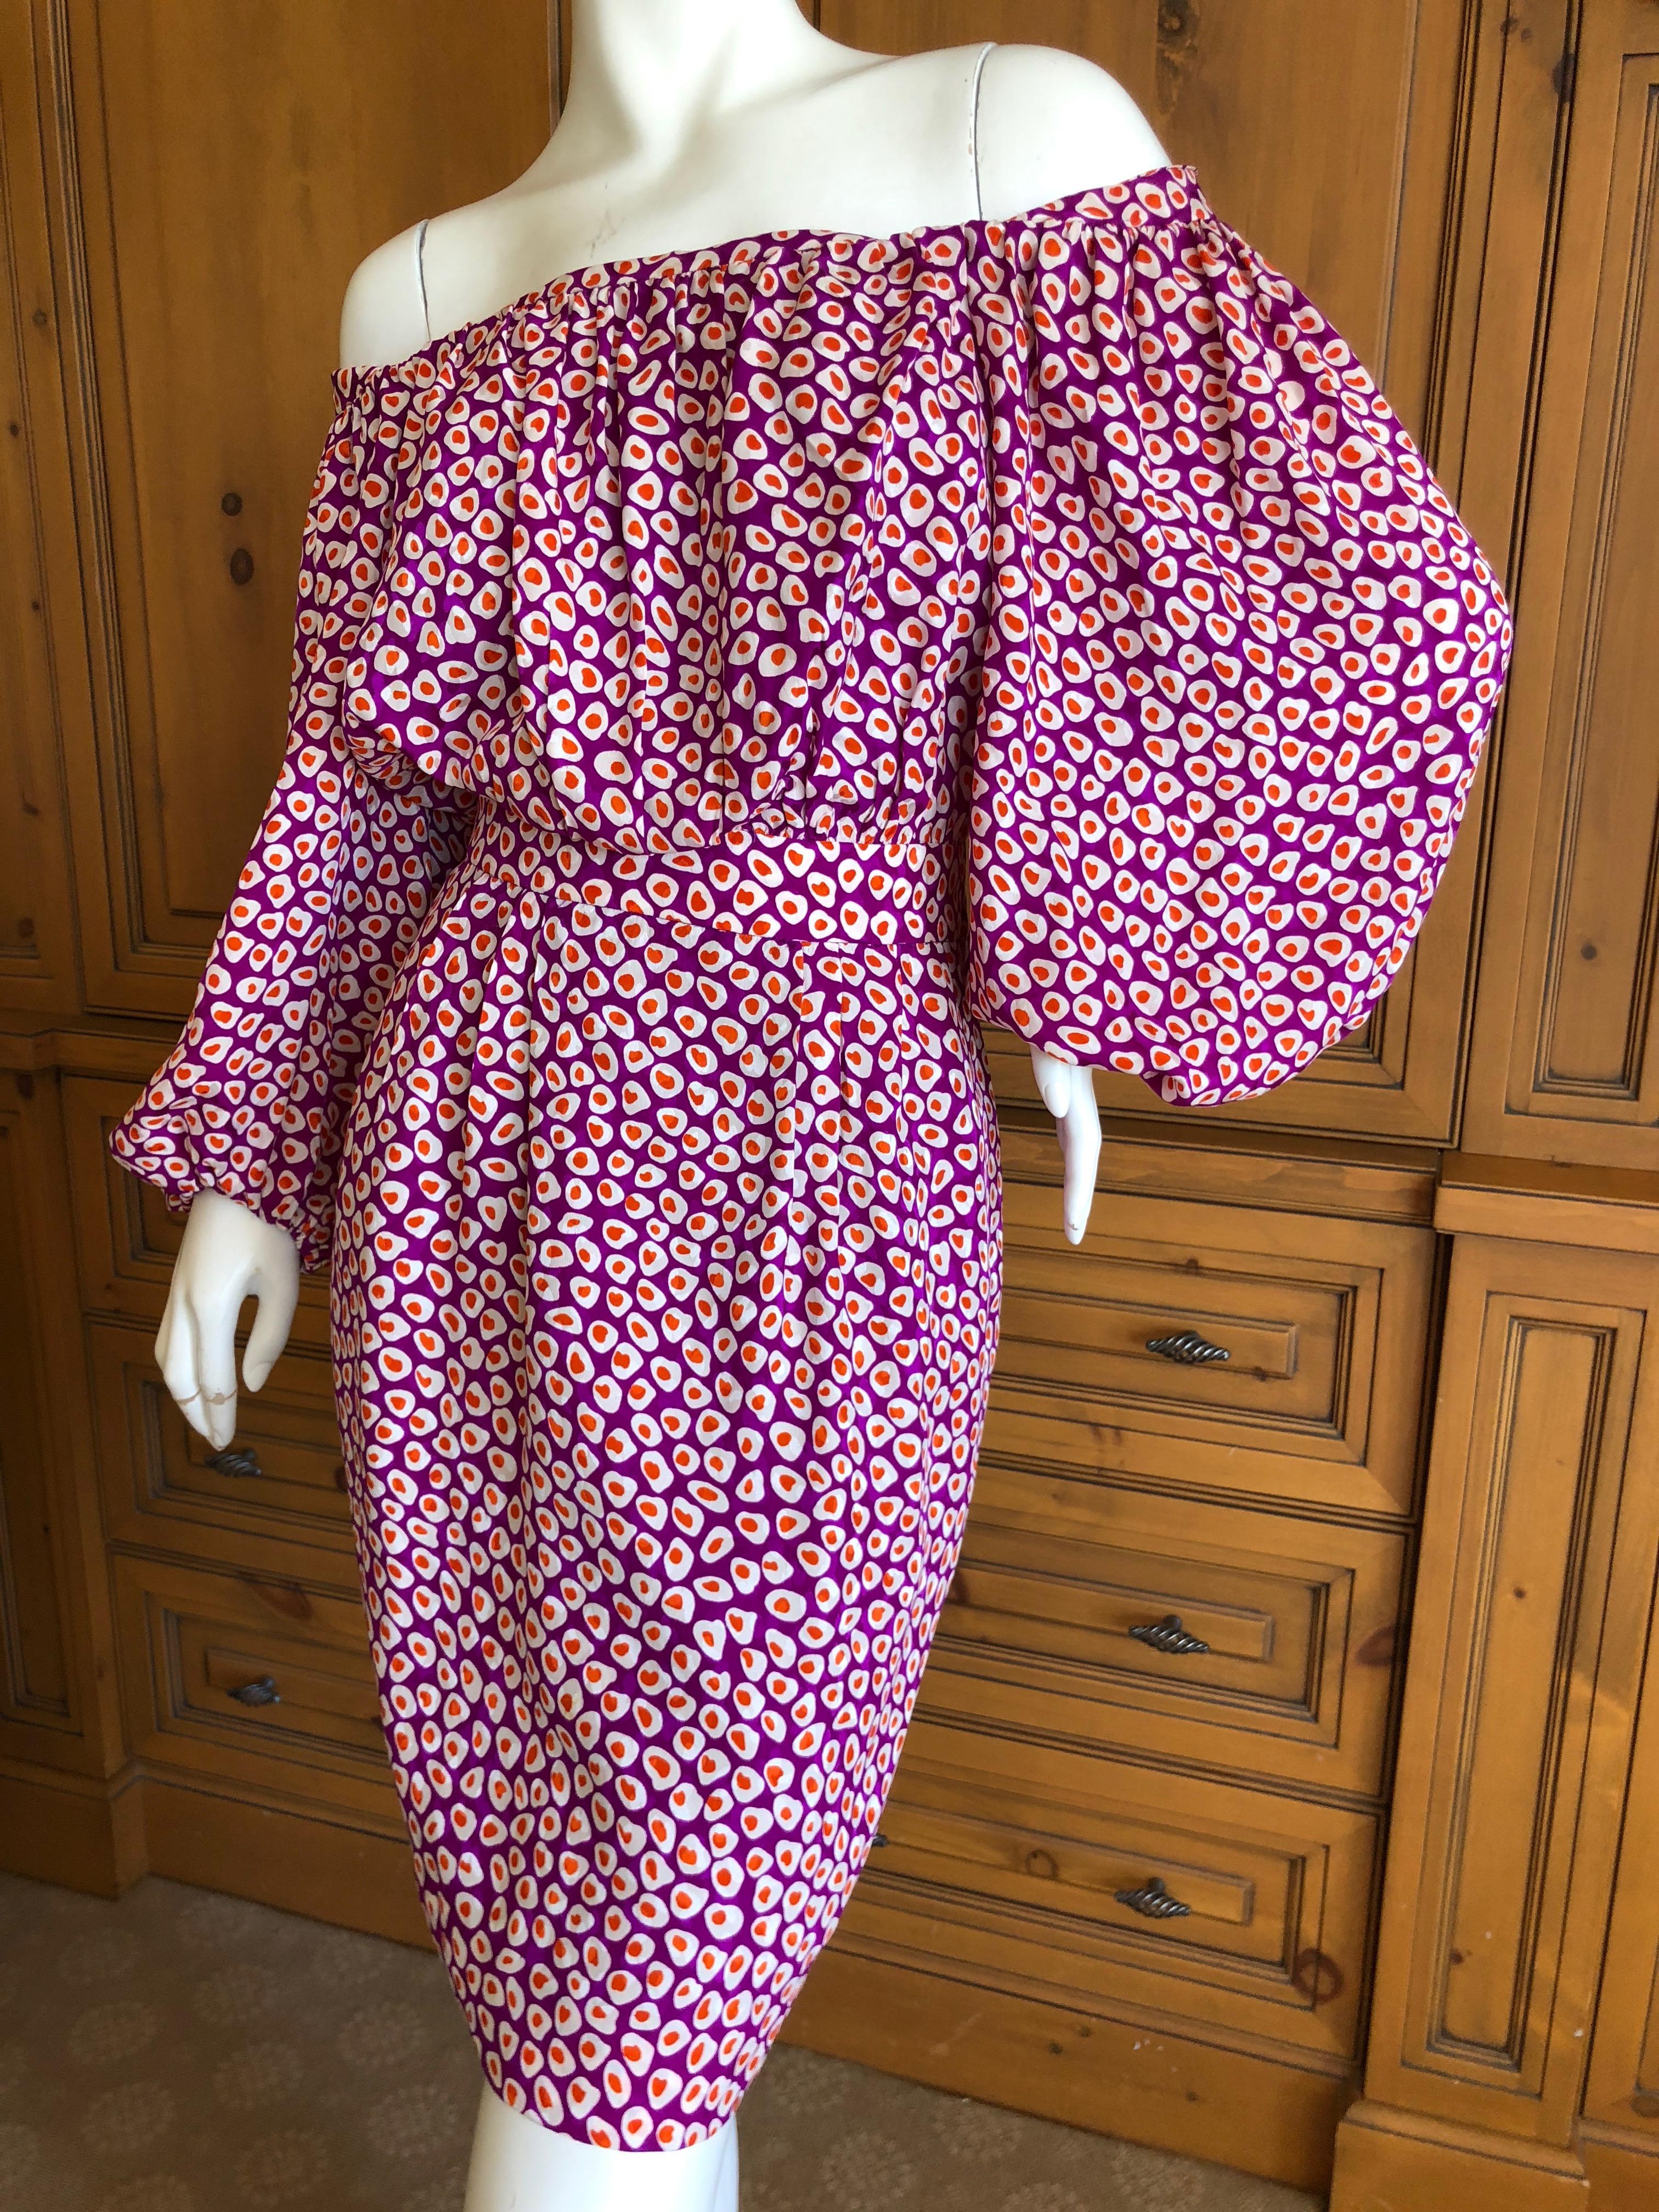 Yves Saint Laurent Rive Gauche 1970's Silk Off the Shoulder Poet Sleeve Dress 
So delightfully French.
Marked Size 46, runs more like a 40
Bust 42